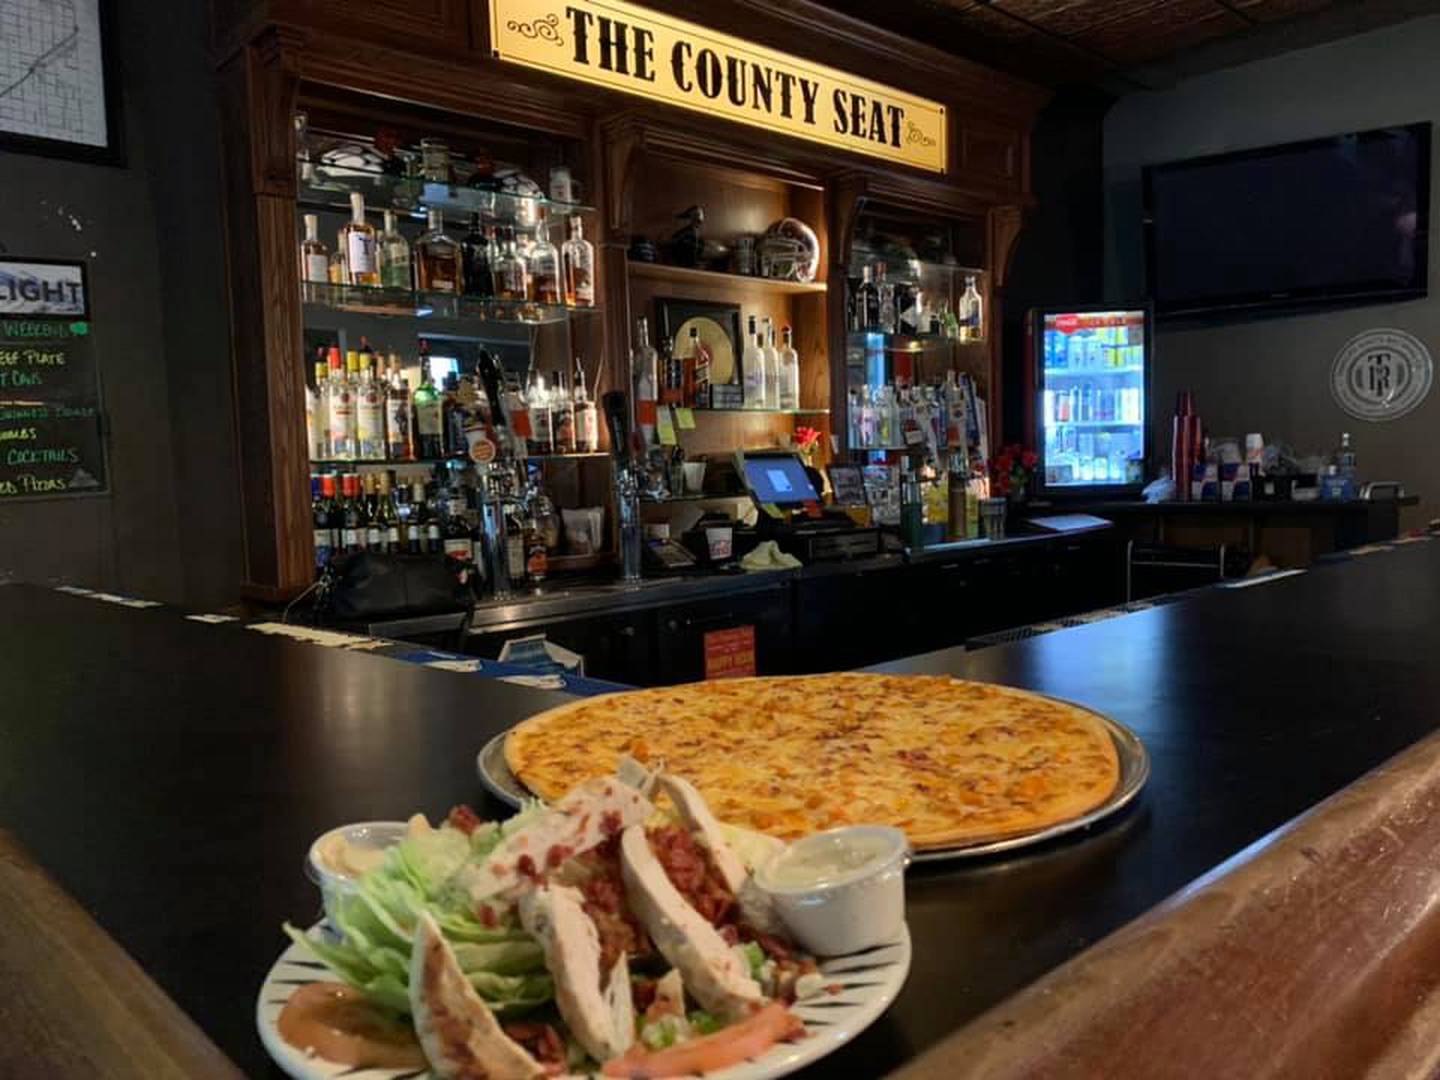 The County Seat Pub & Pizzeria in Morris was voted one of the best pizza places in Grundy County by readers in 2021. (Photo from The County Seat Pub & Pizzeria website)